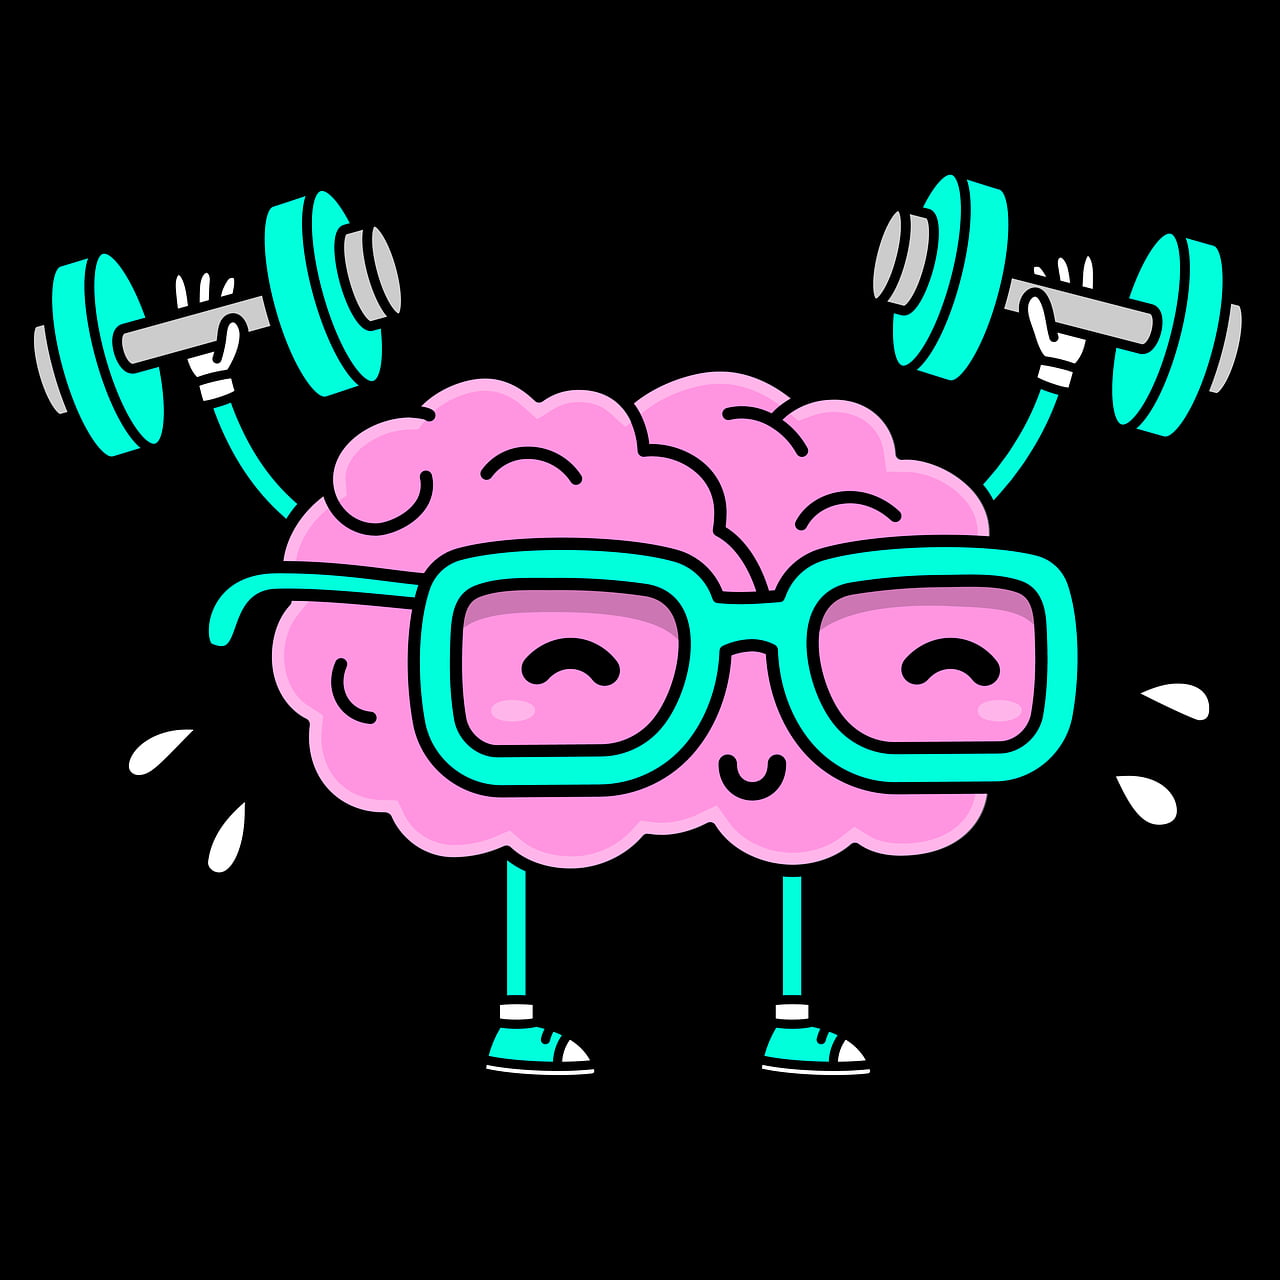 Regular Exercise Helps Your Brain Function